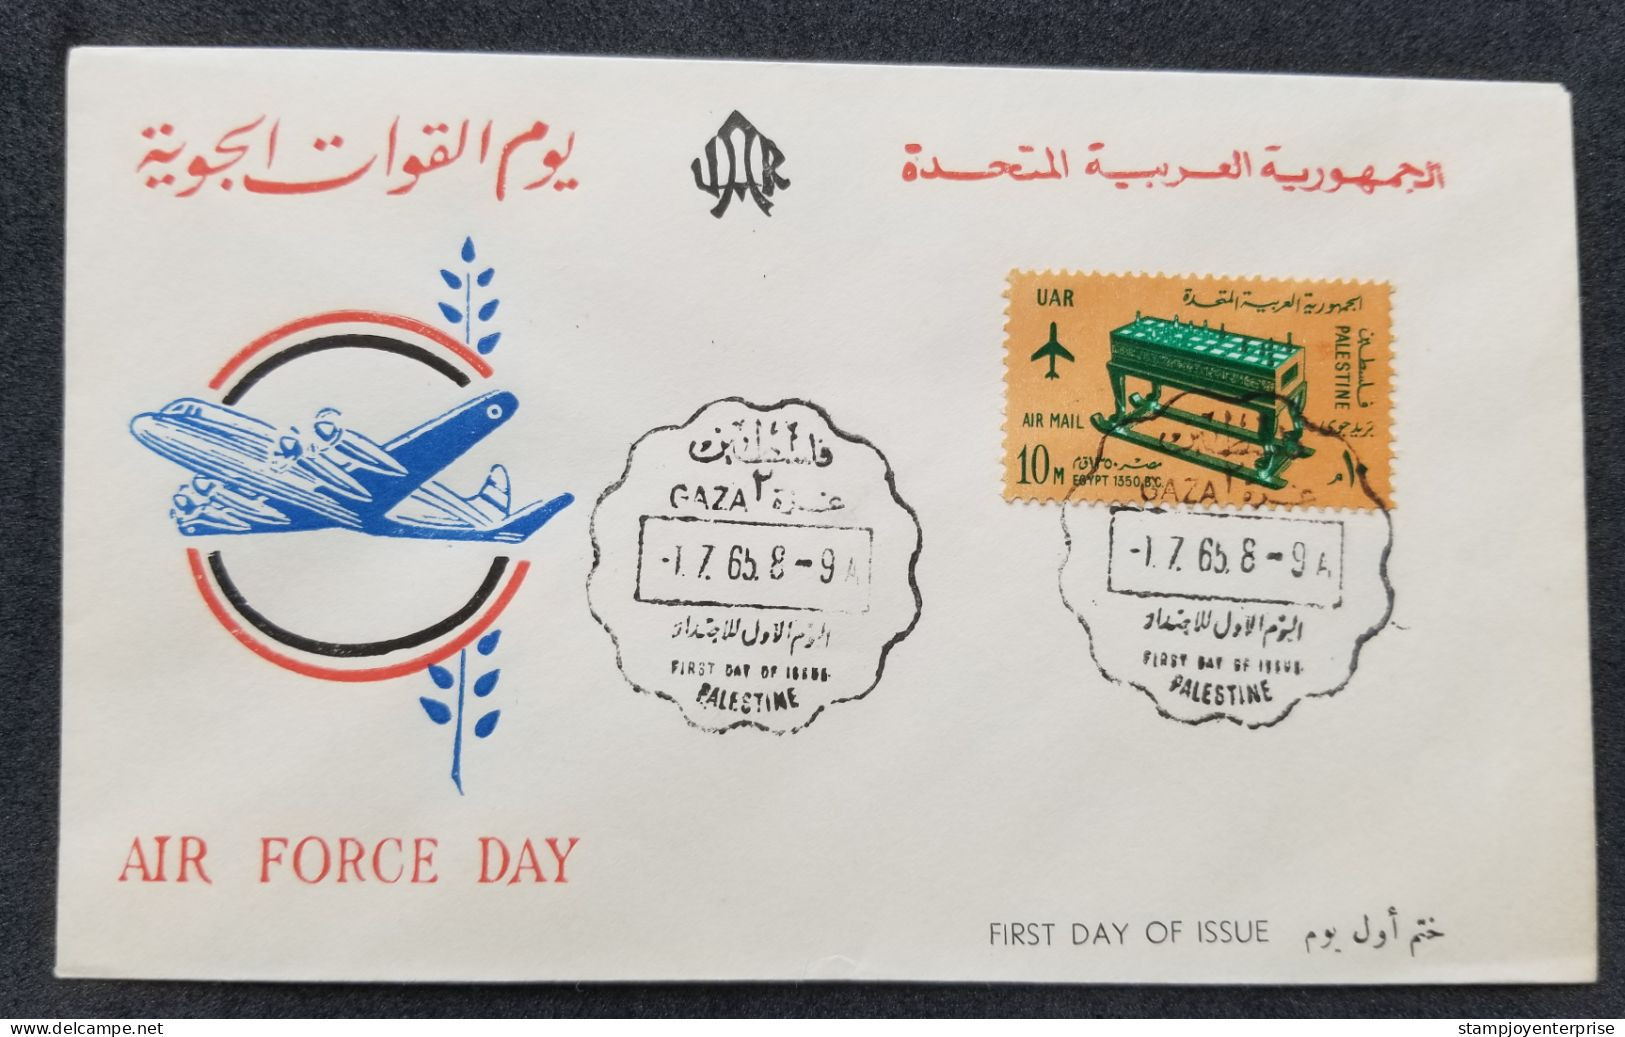 Egypt UAR Palestine Air Force Day 1965 Aviation Airplane (stamp FDC) - Covers & Documents